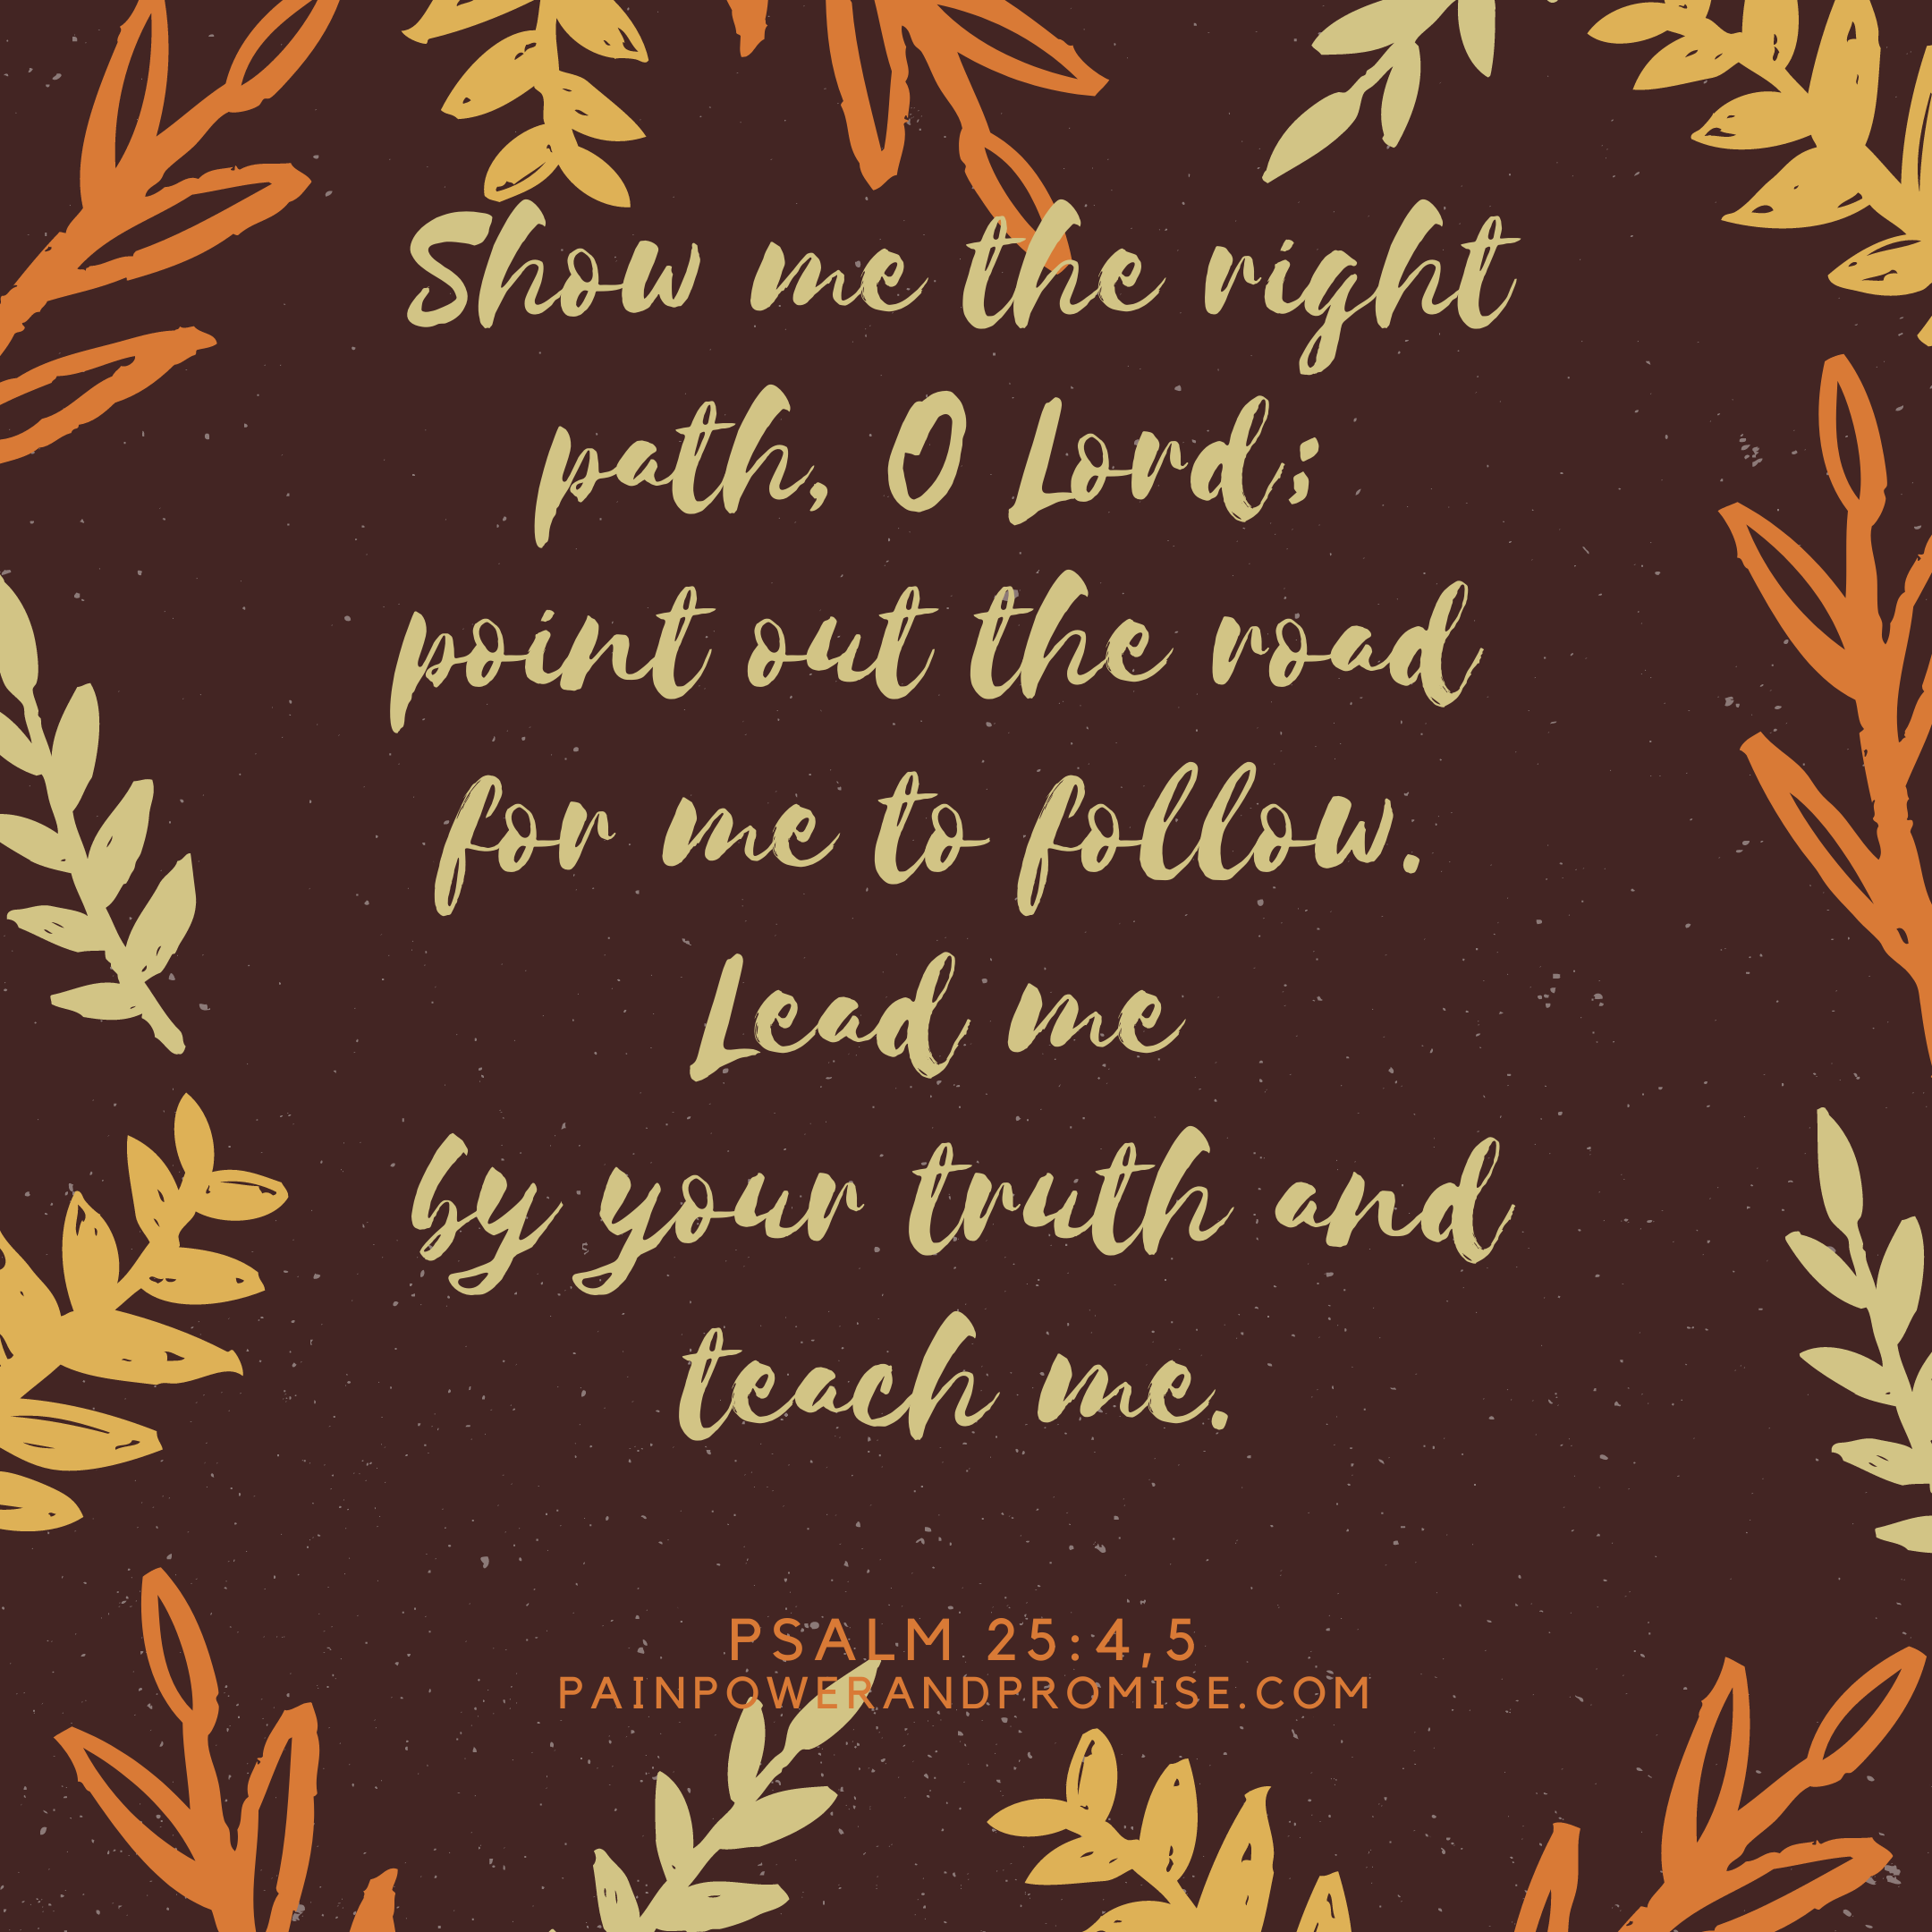 Inspirational Scripture: Show me the right path, O Lord; point out the road for me to follow. Lead me by your truth and teach me.